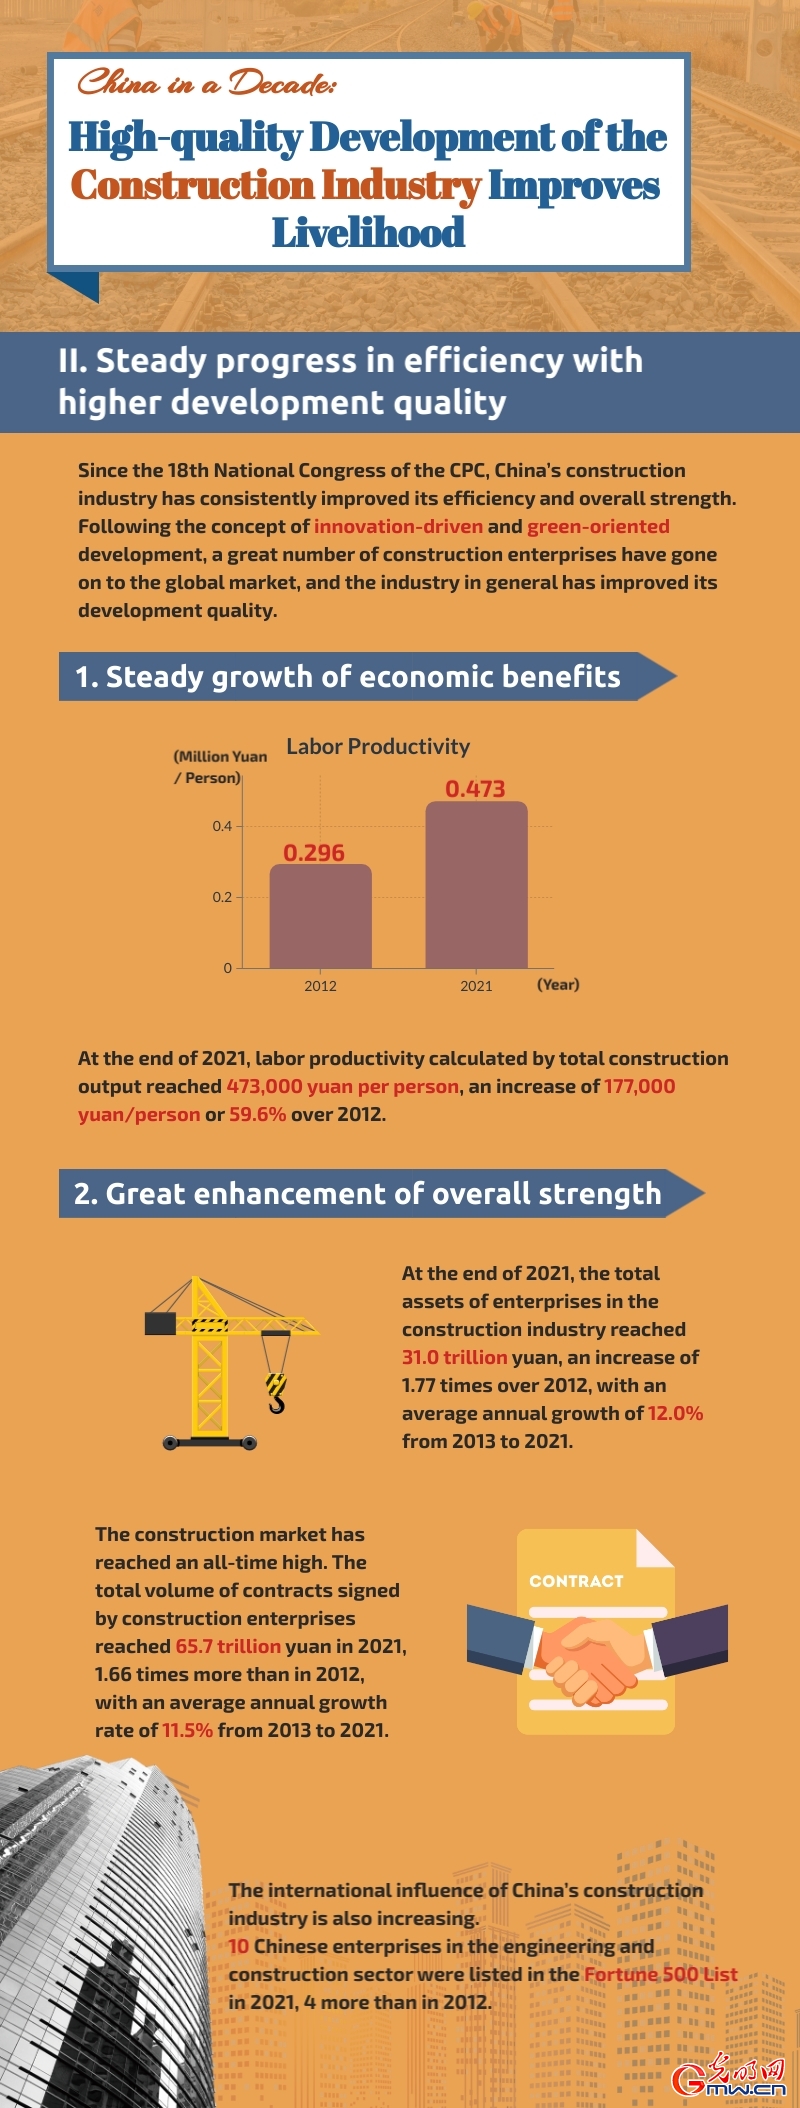 China in a Decade: High-quality development of the construction industry improves livelihood